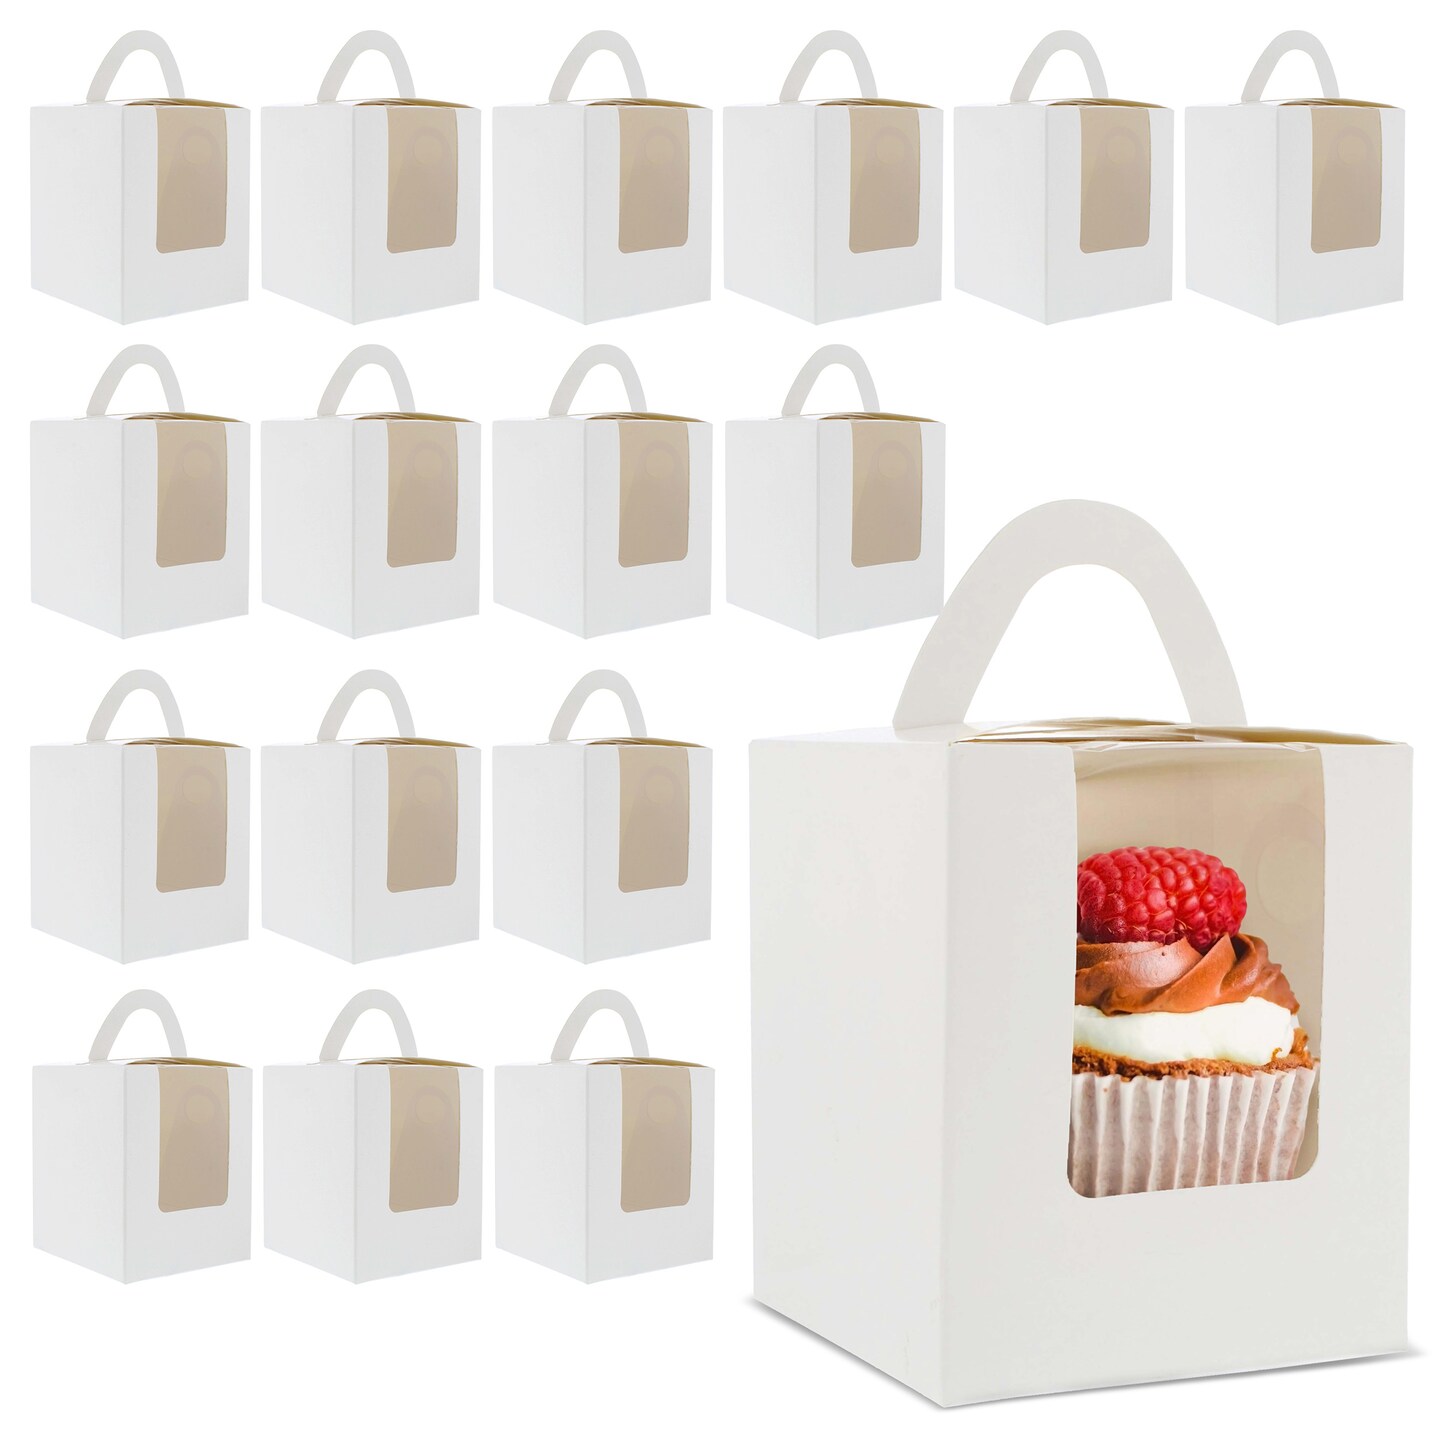 Spec101 | Single Cupcake Holders - 100 Pk Individual Cupcake Boxes with Inserts